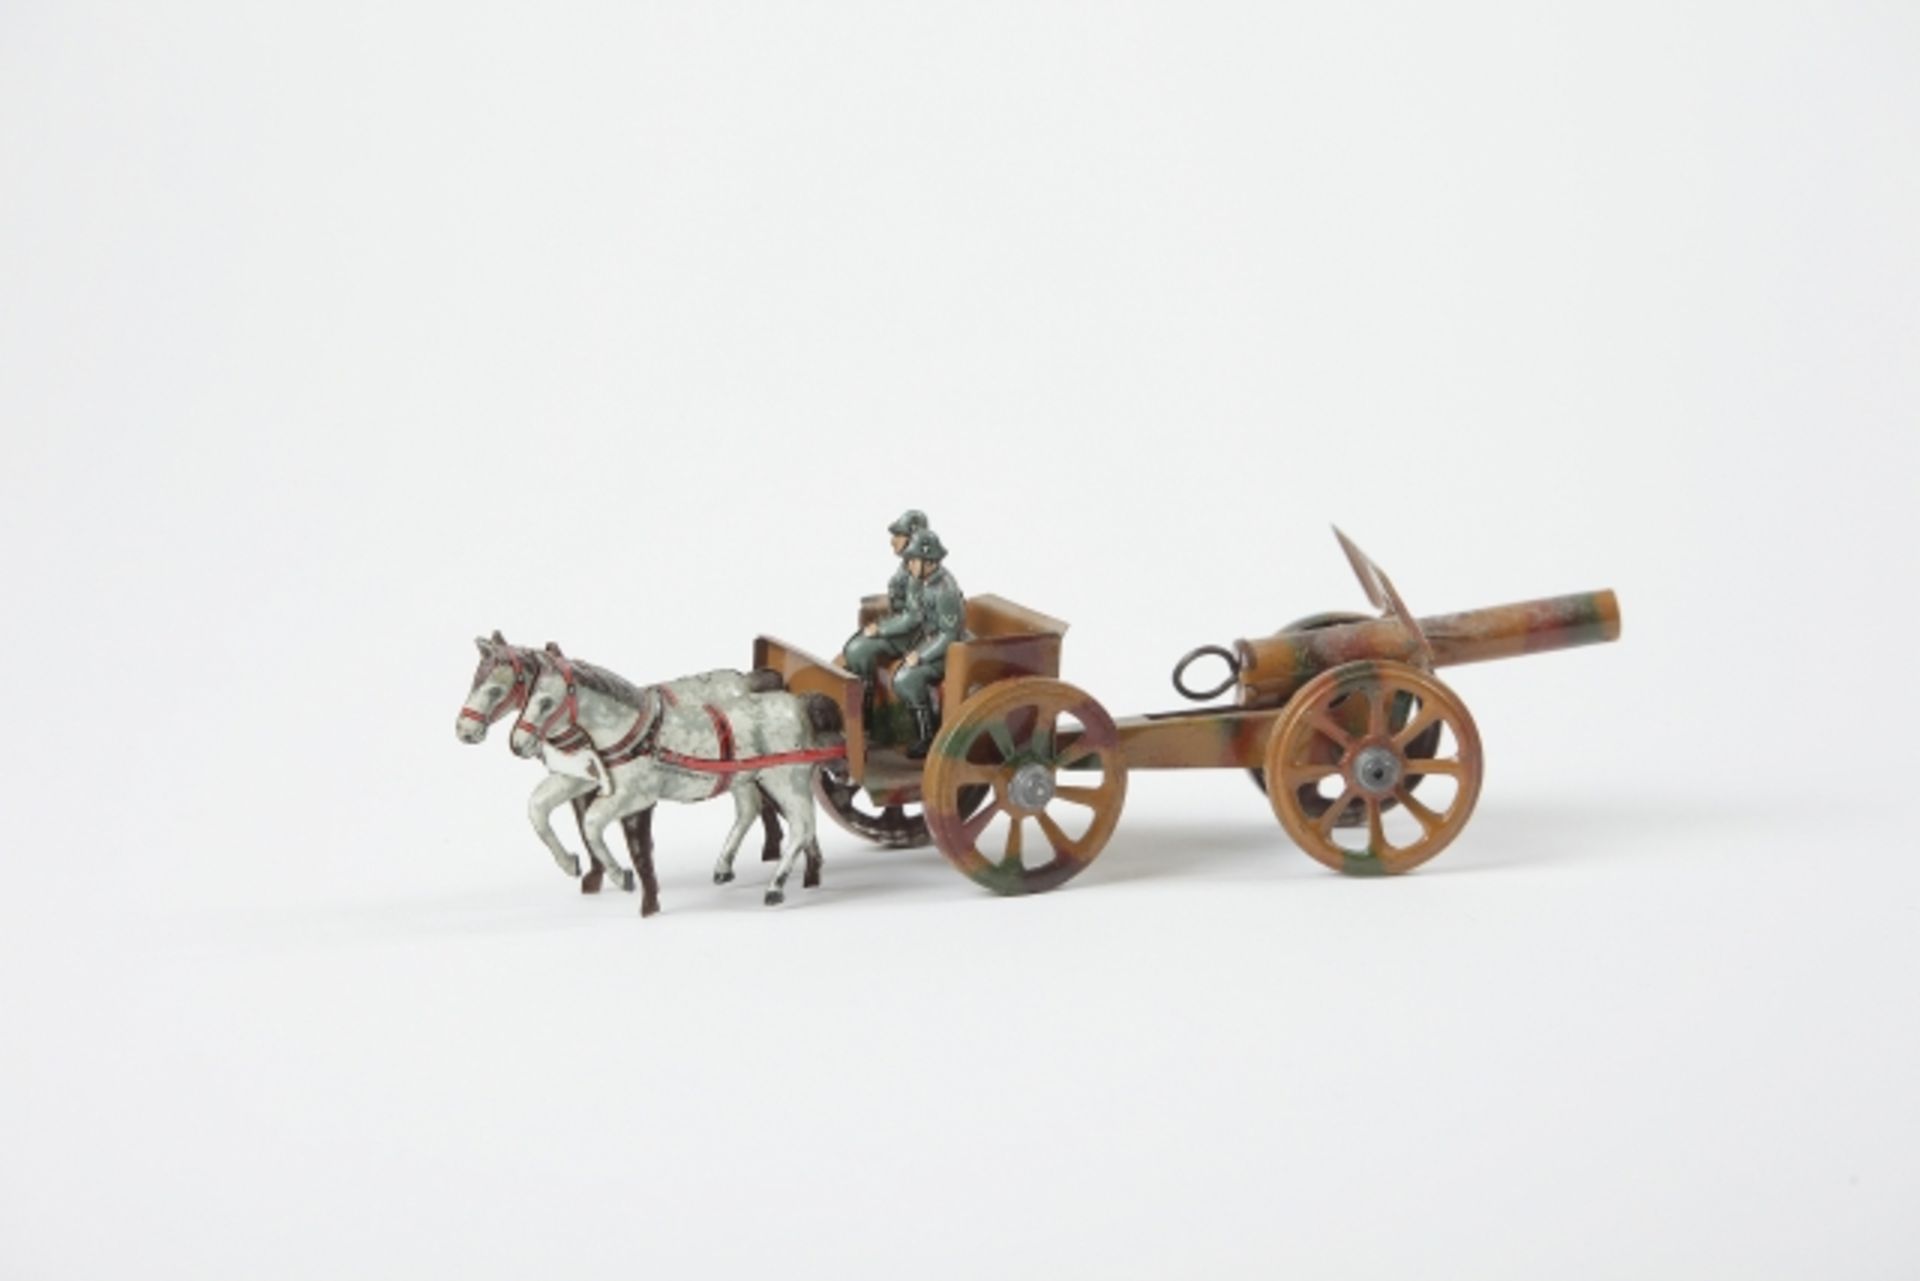 Penny Toy Gespann mit Kanone, 1920-1930, Blech, Marke Georg Fischer(?), Made in Germany, farbig